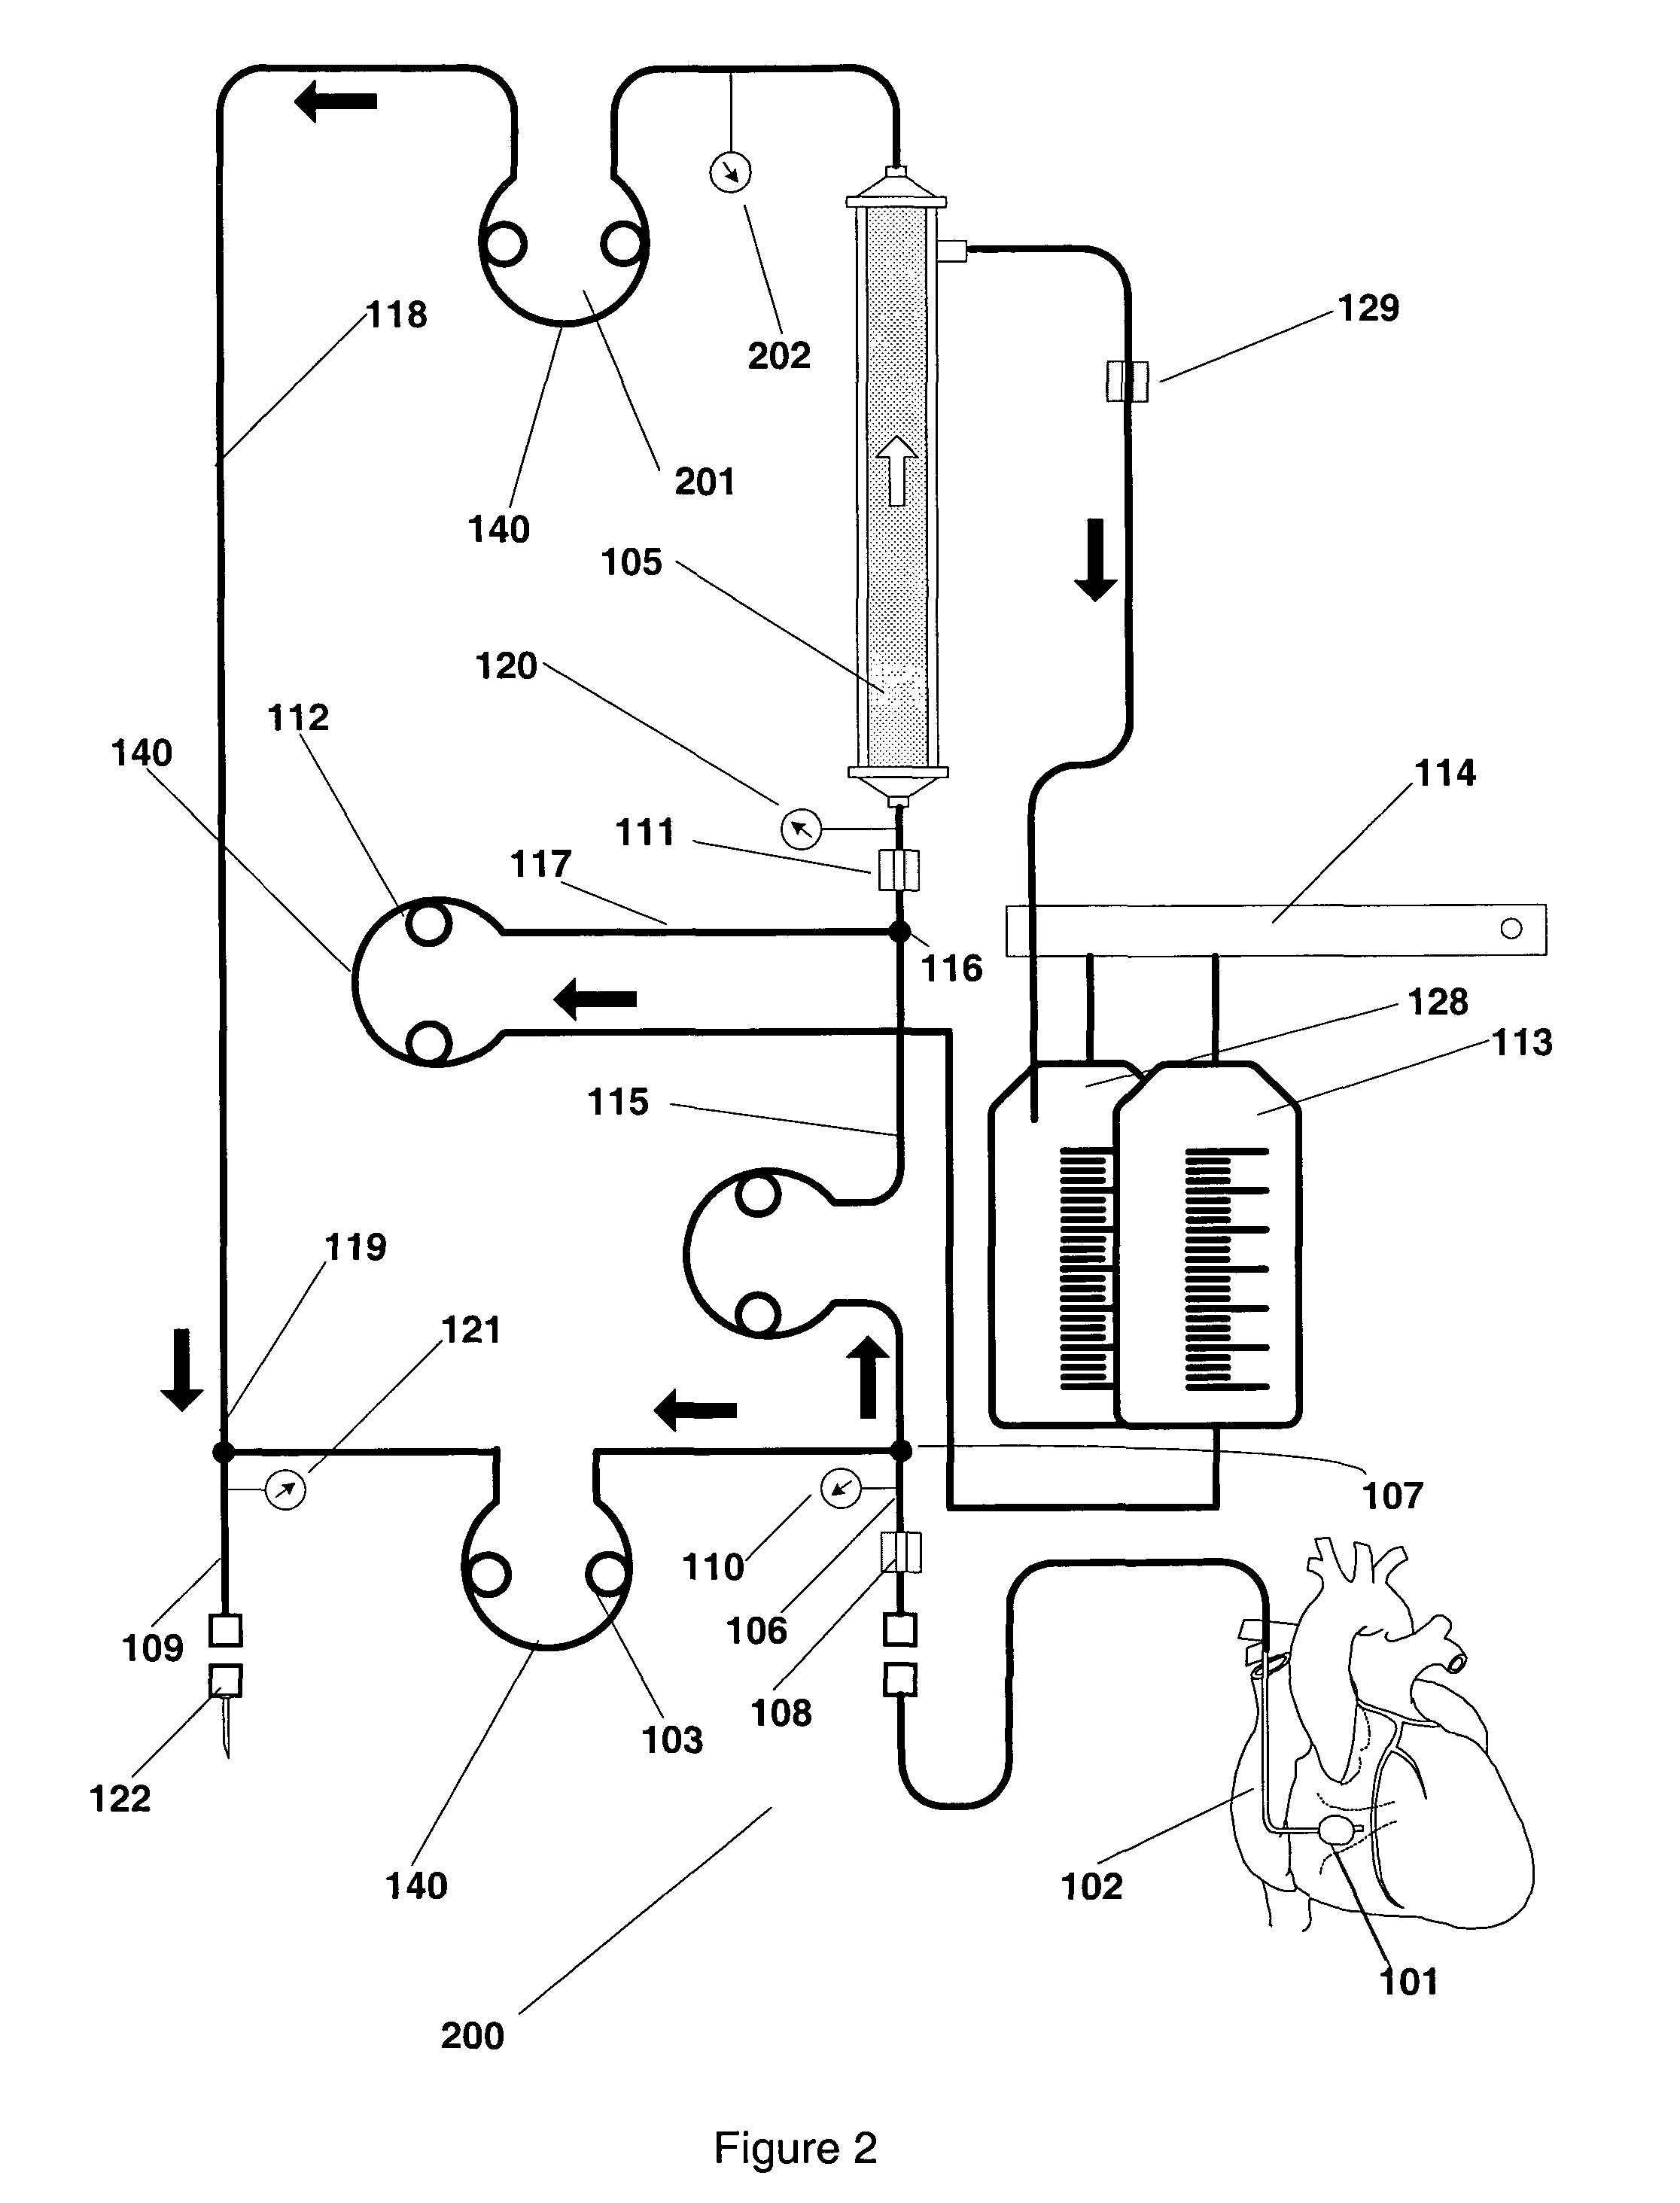 Method and device for removal of radiocontrast media from blood